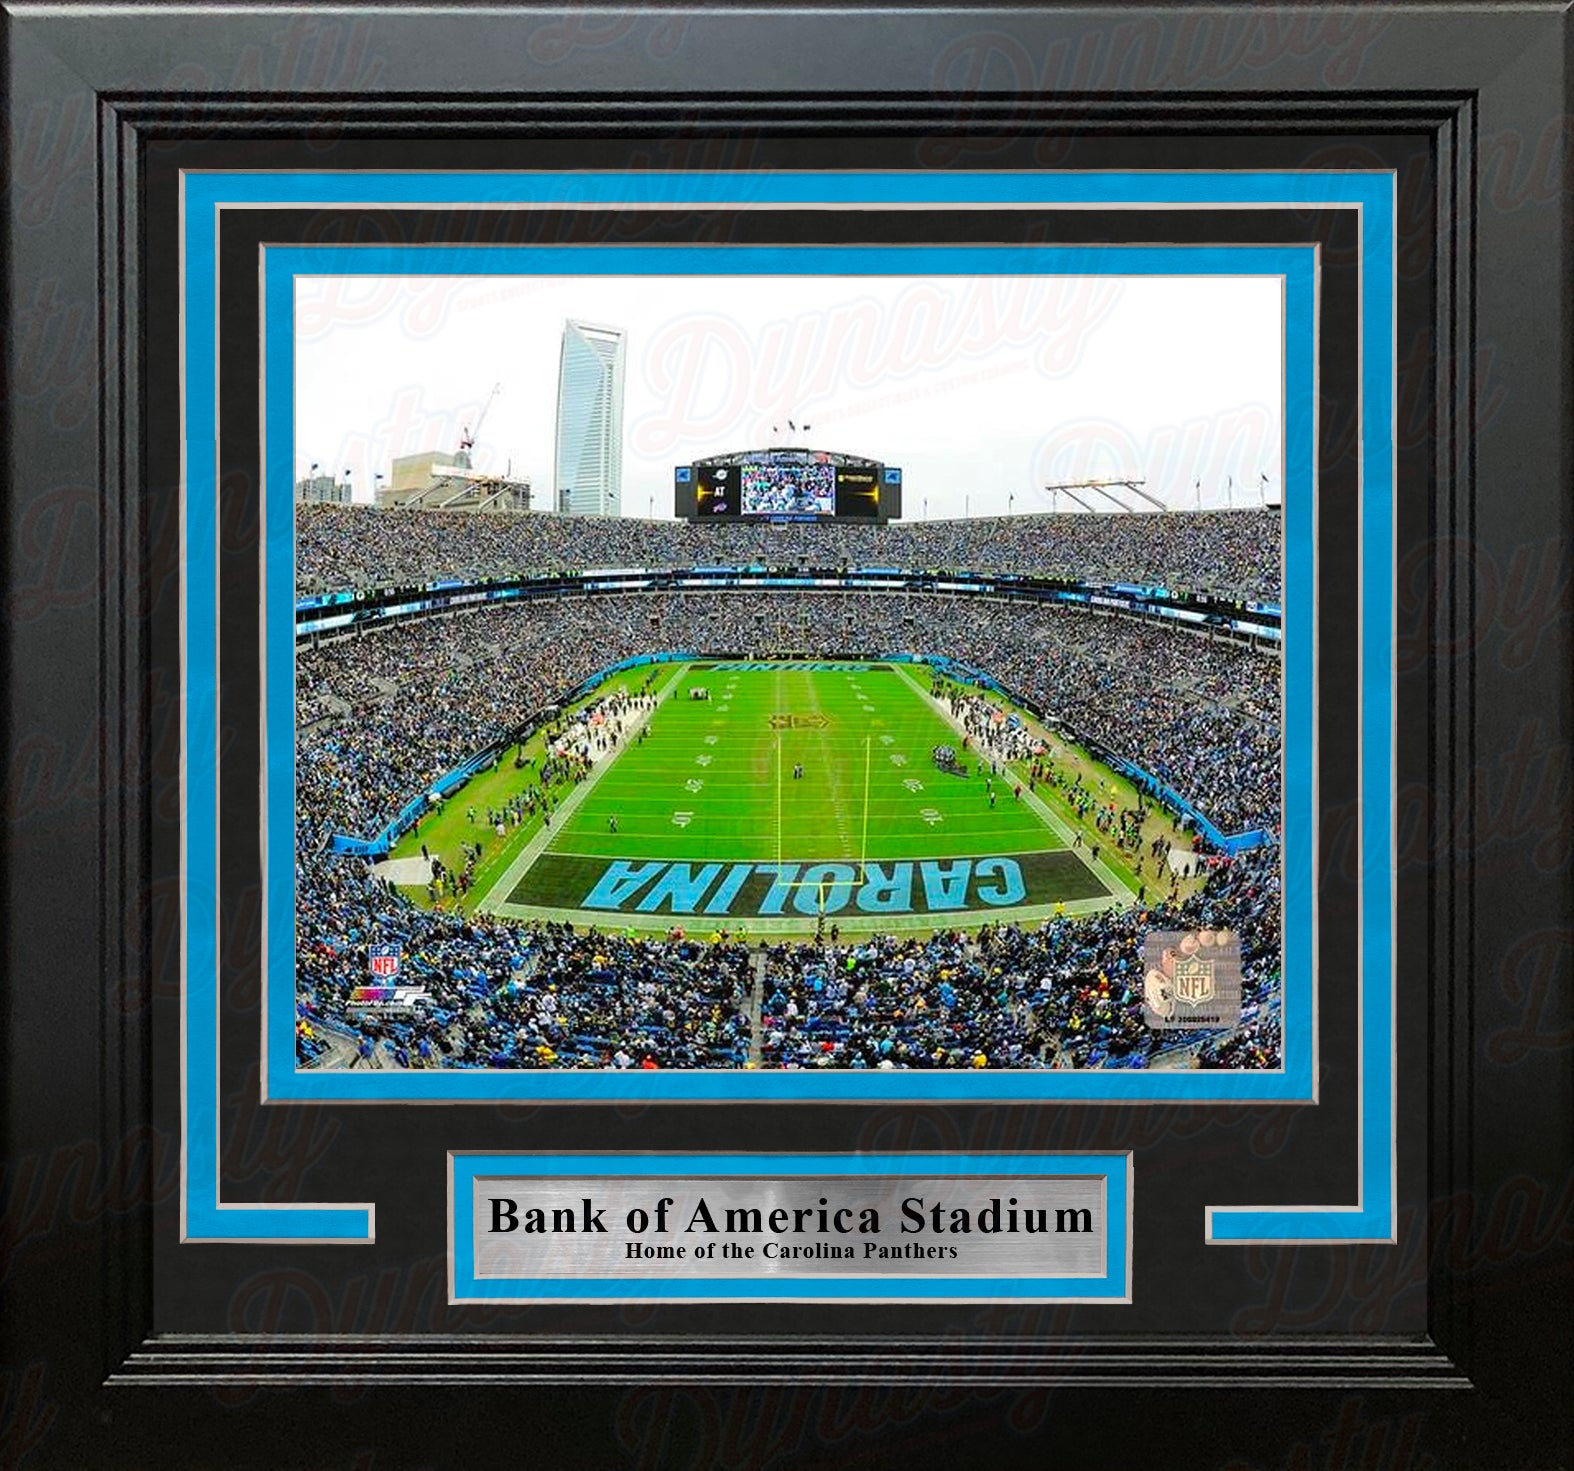 Carolina Panthers Bank of America Stadium NFL Football 8' x 10' Framed and  Matted Photo